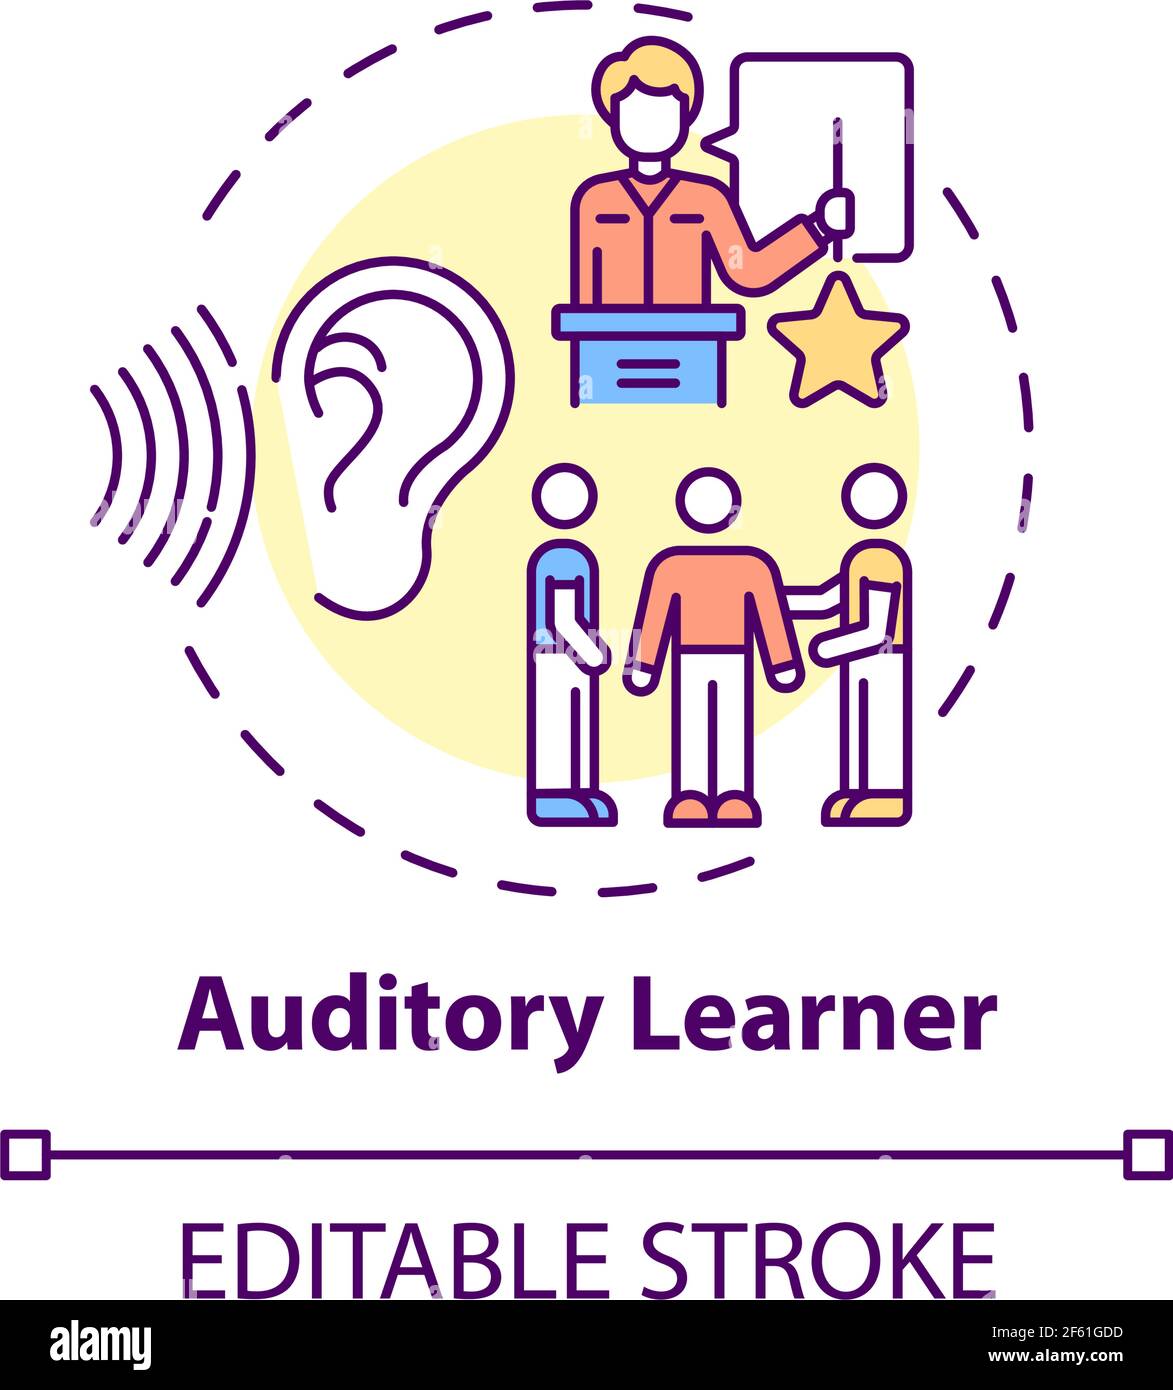 auditory learner clipart